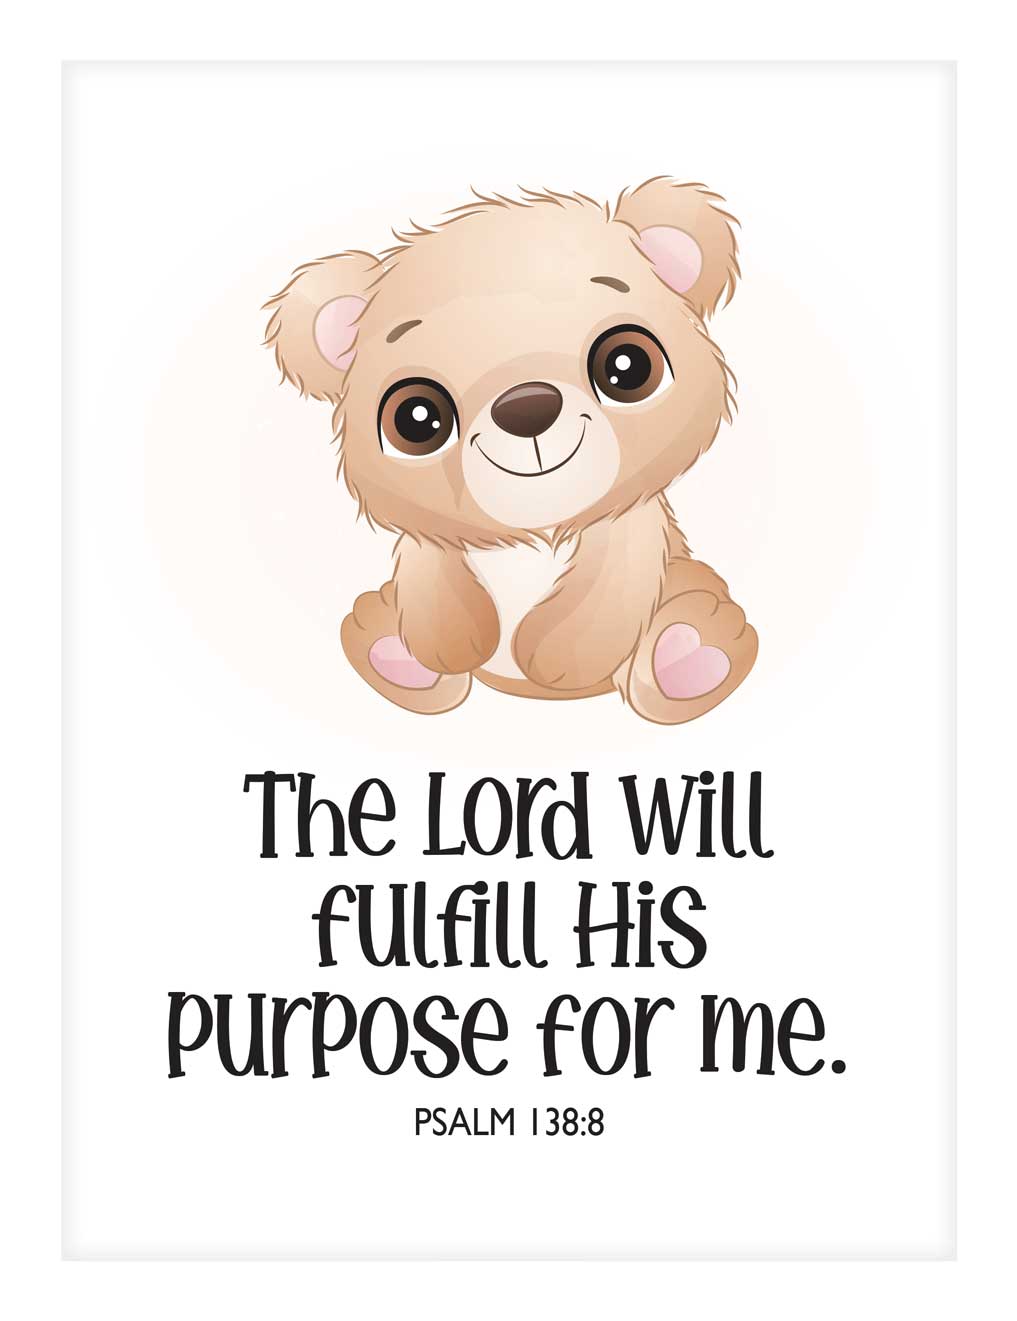 The Lord Will Fulfill